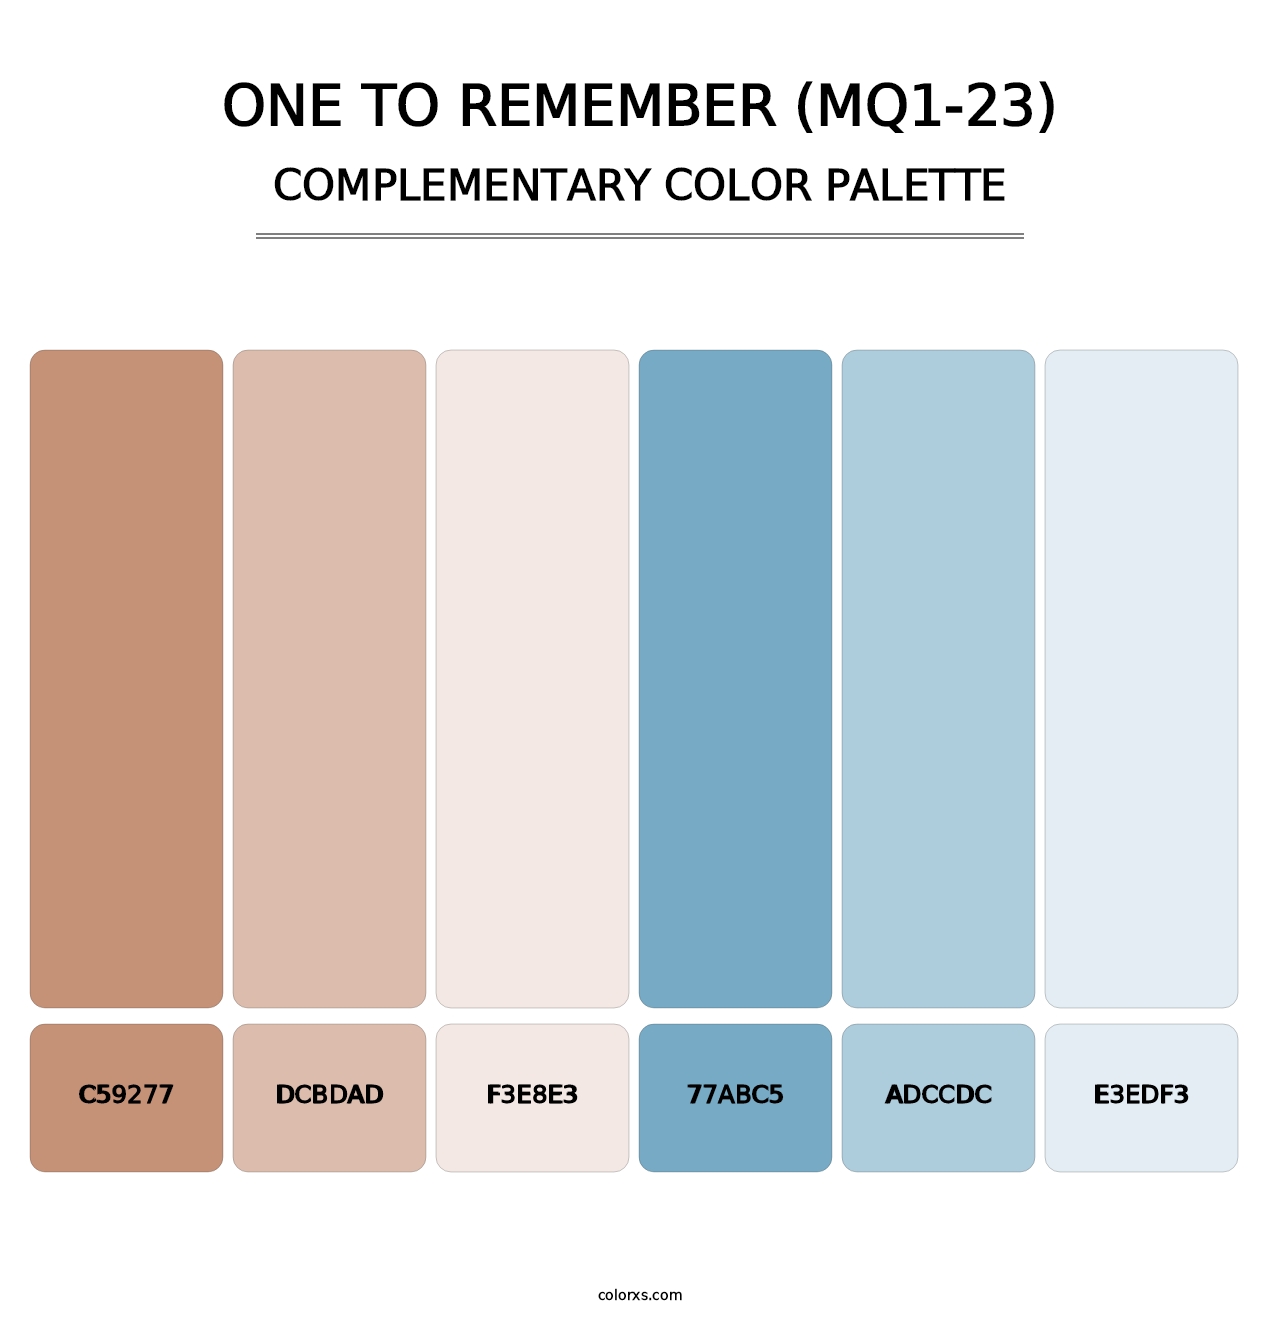 One To Remember (MQ1-23) - Complementary Color Palette